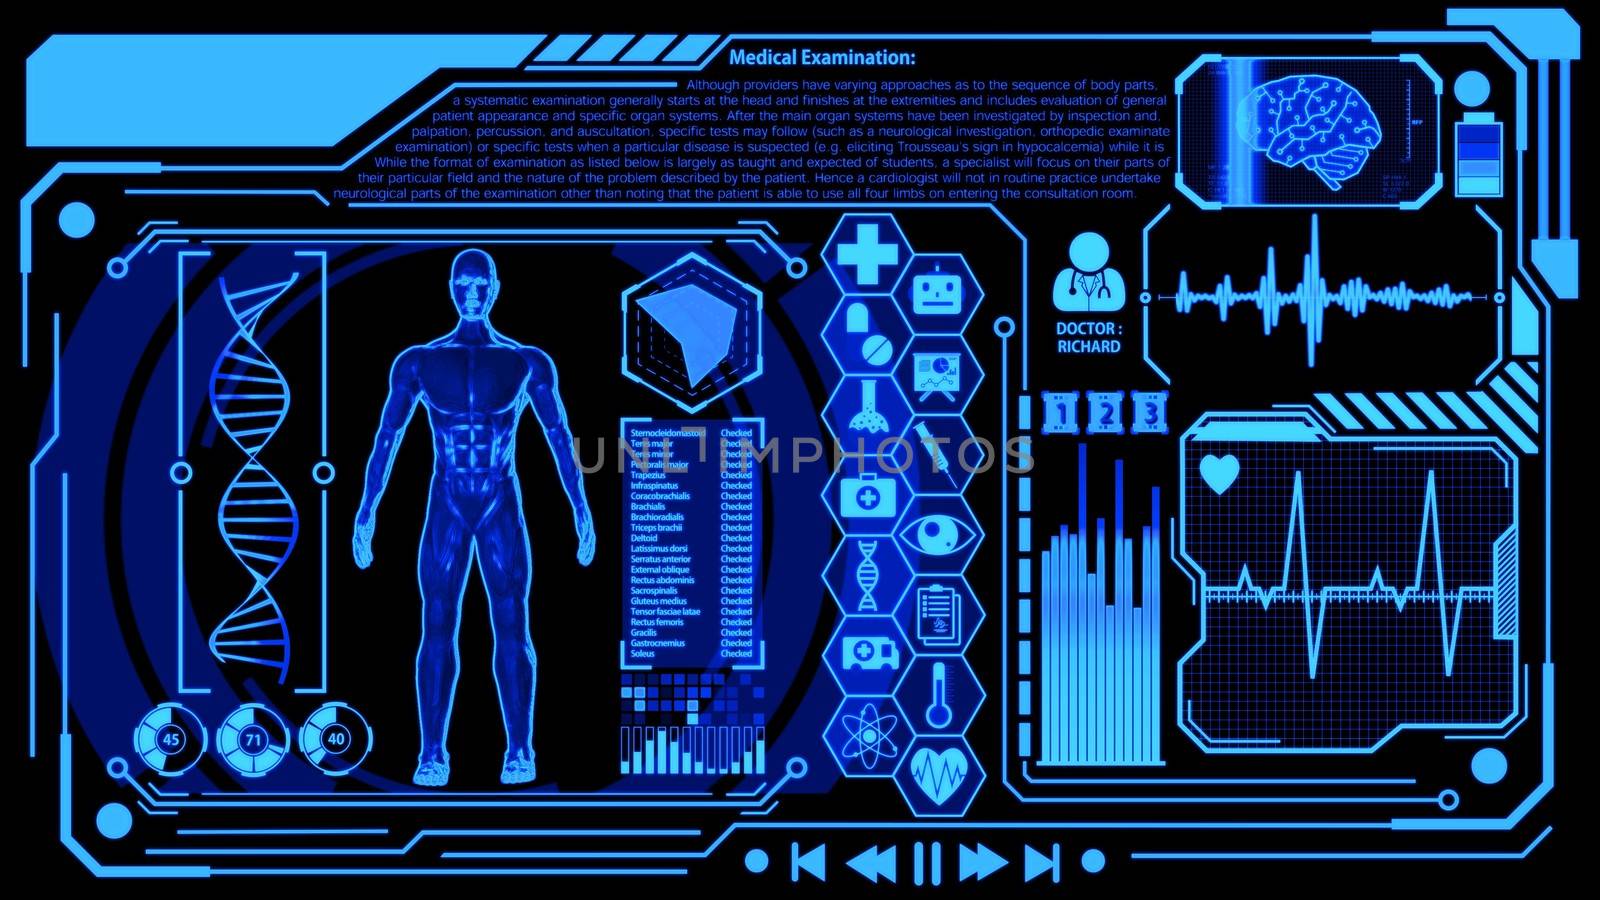 3D Human Model Rendering Rotating in Medical Futuristic HUD Display Screen including Icon sets, Digital Brain Scan, Heart Wave and more with Blue Color Still Image Ver.1 (Full Screen)